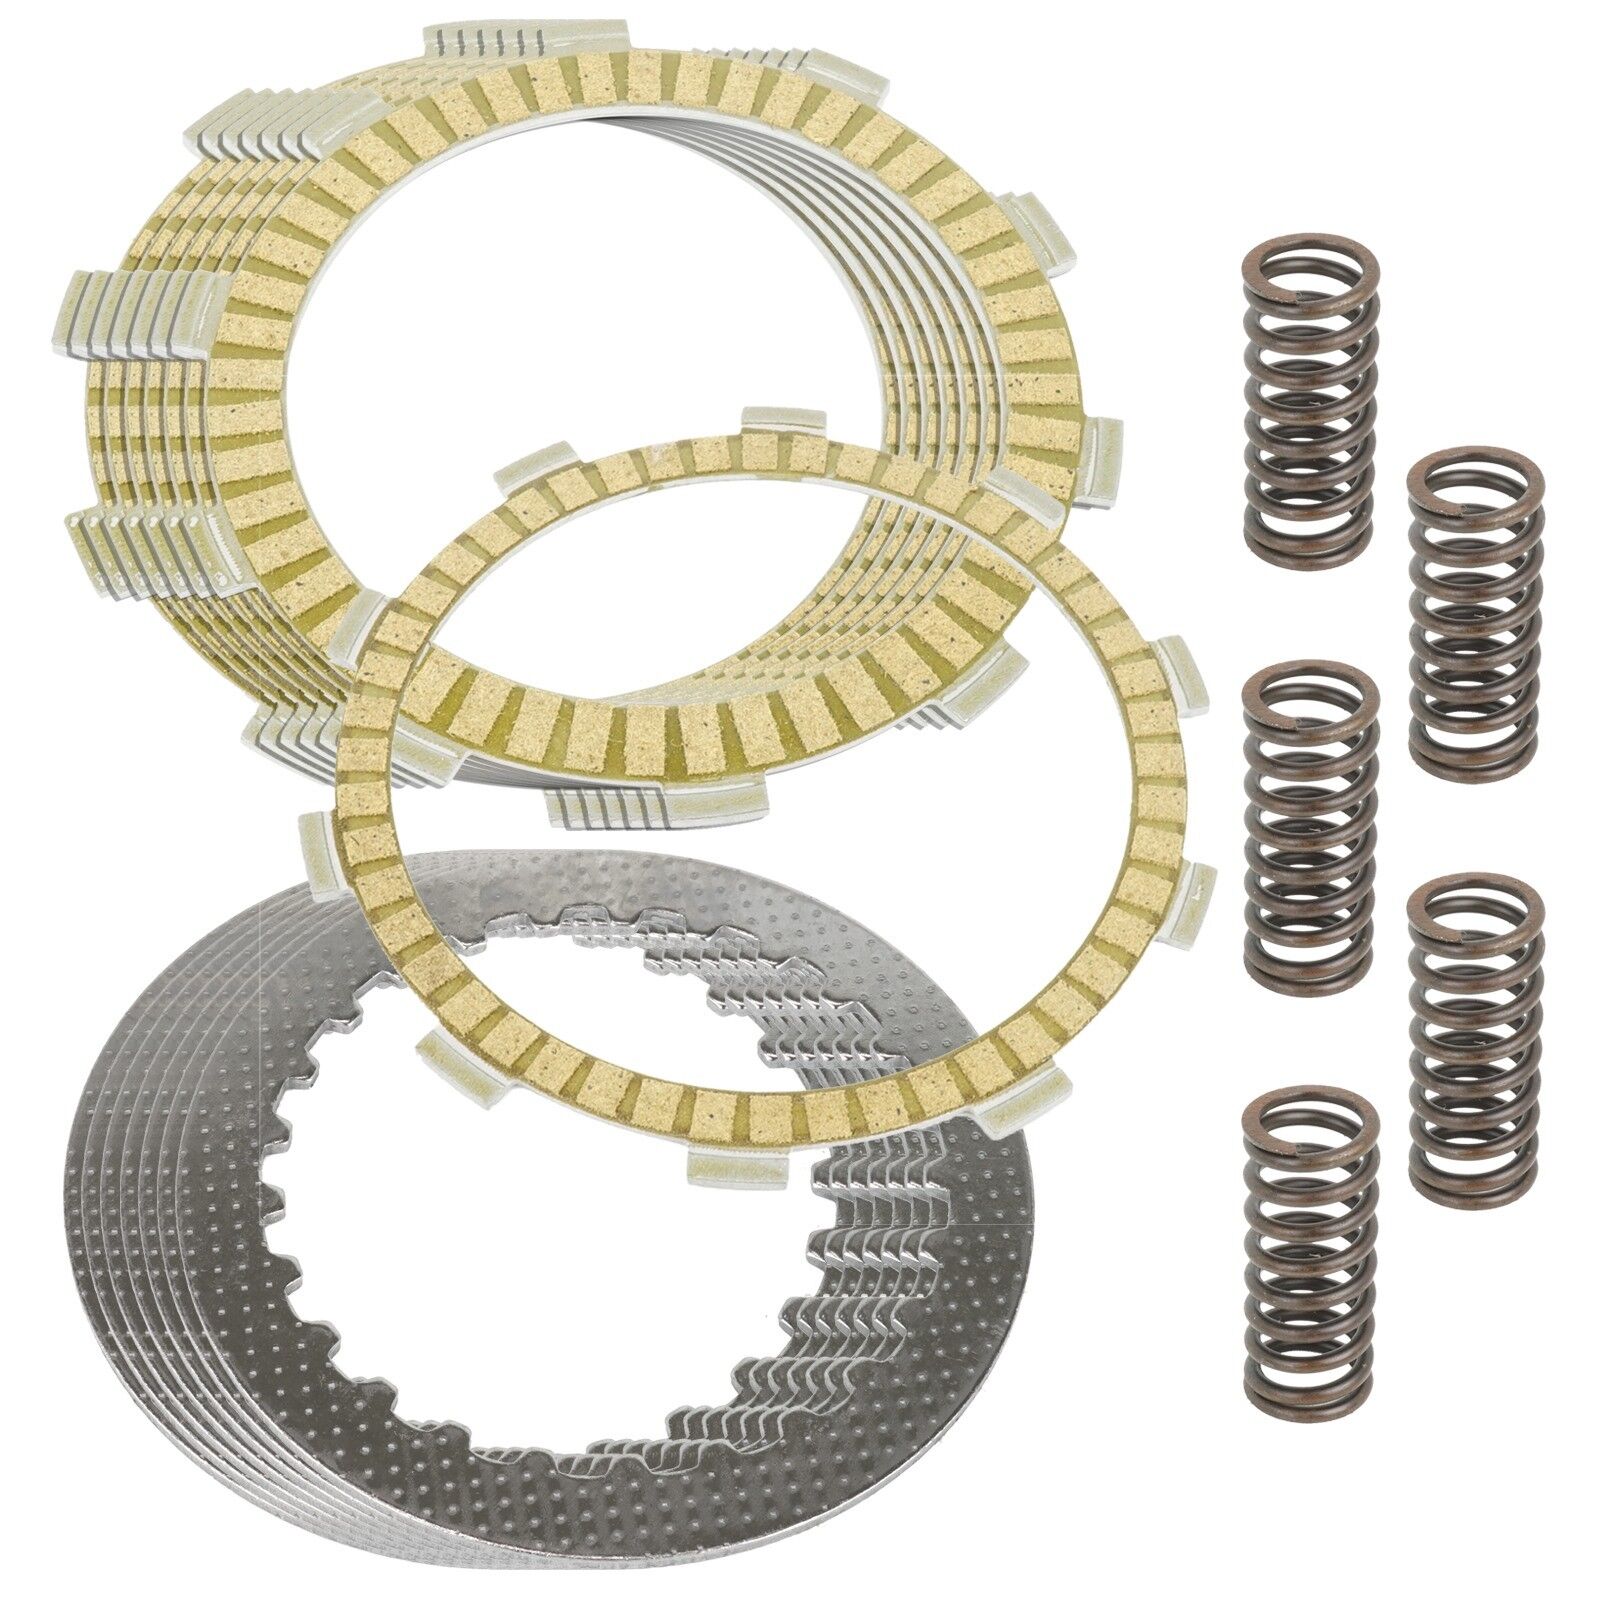 Clutch Friction Steel Plates And Springs Kit for Honda CBR600F4I 2001-2006